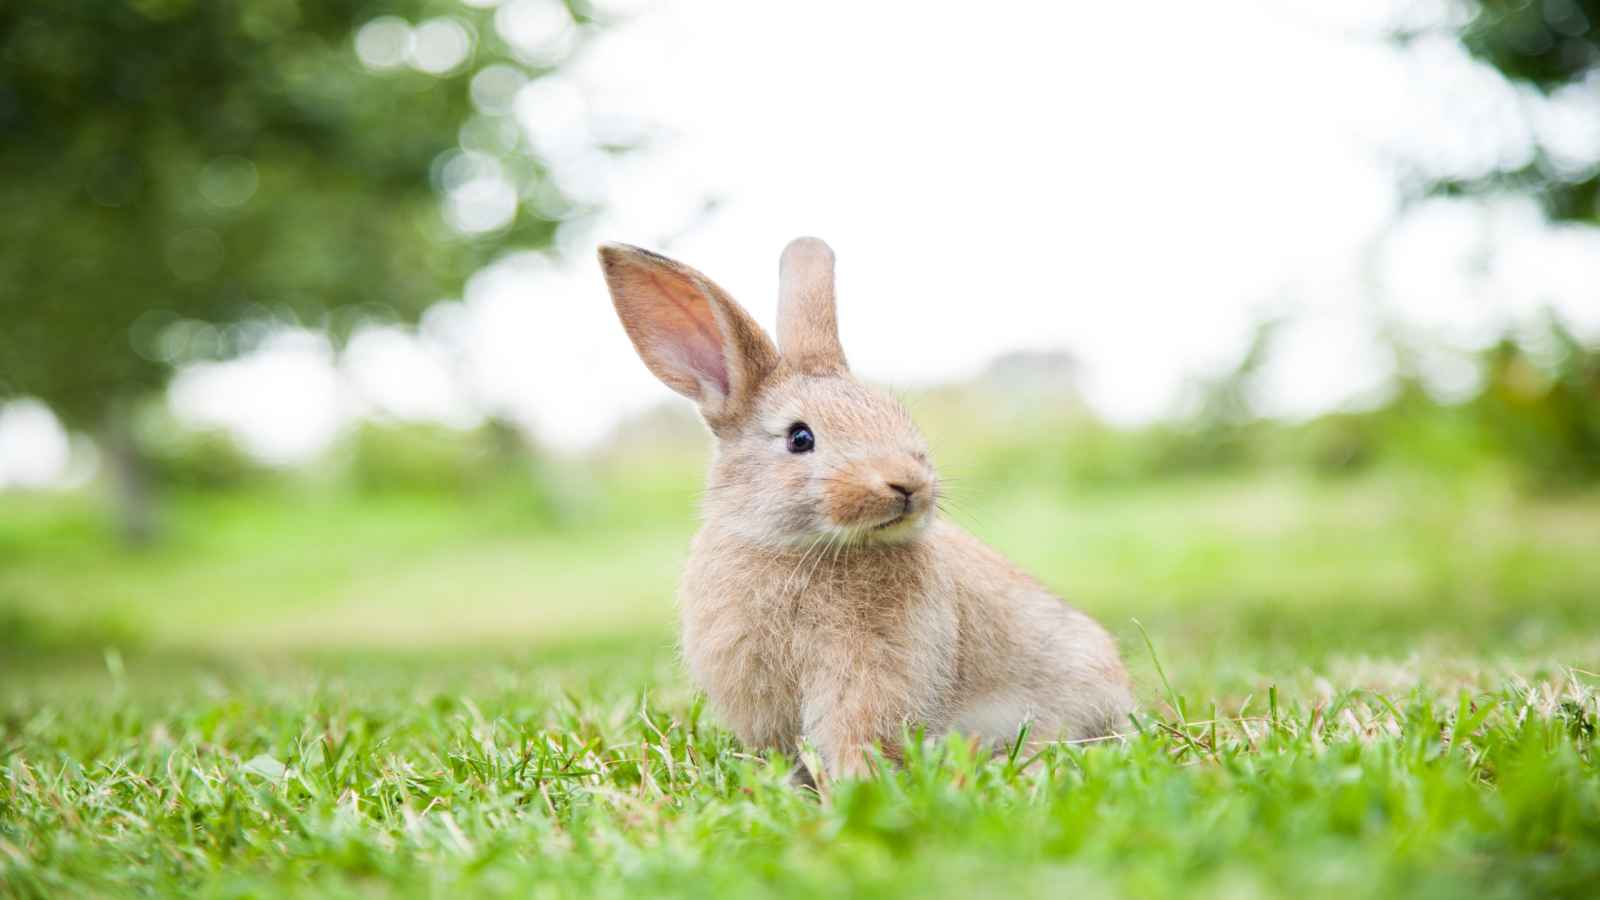 International Rabbit Day 2022: Date, Importance and Significance